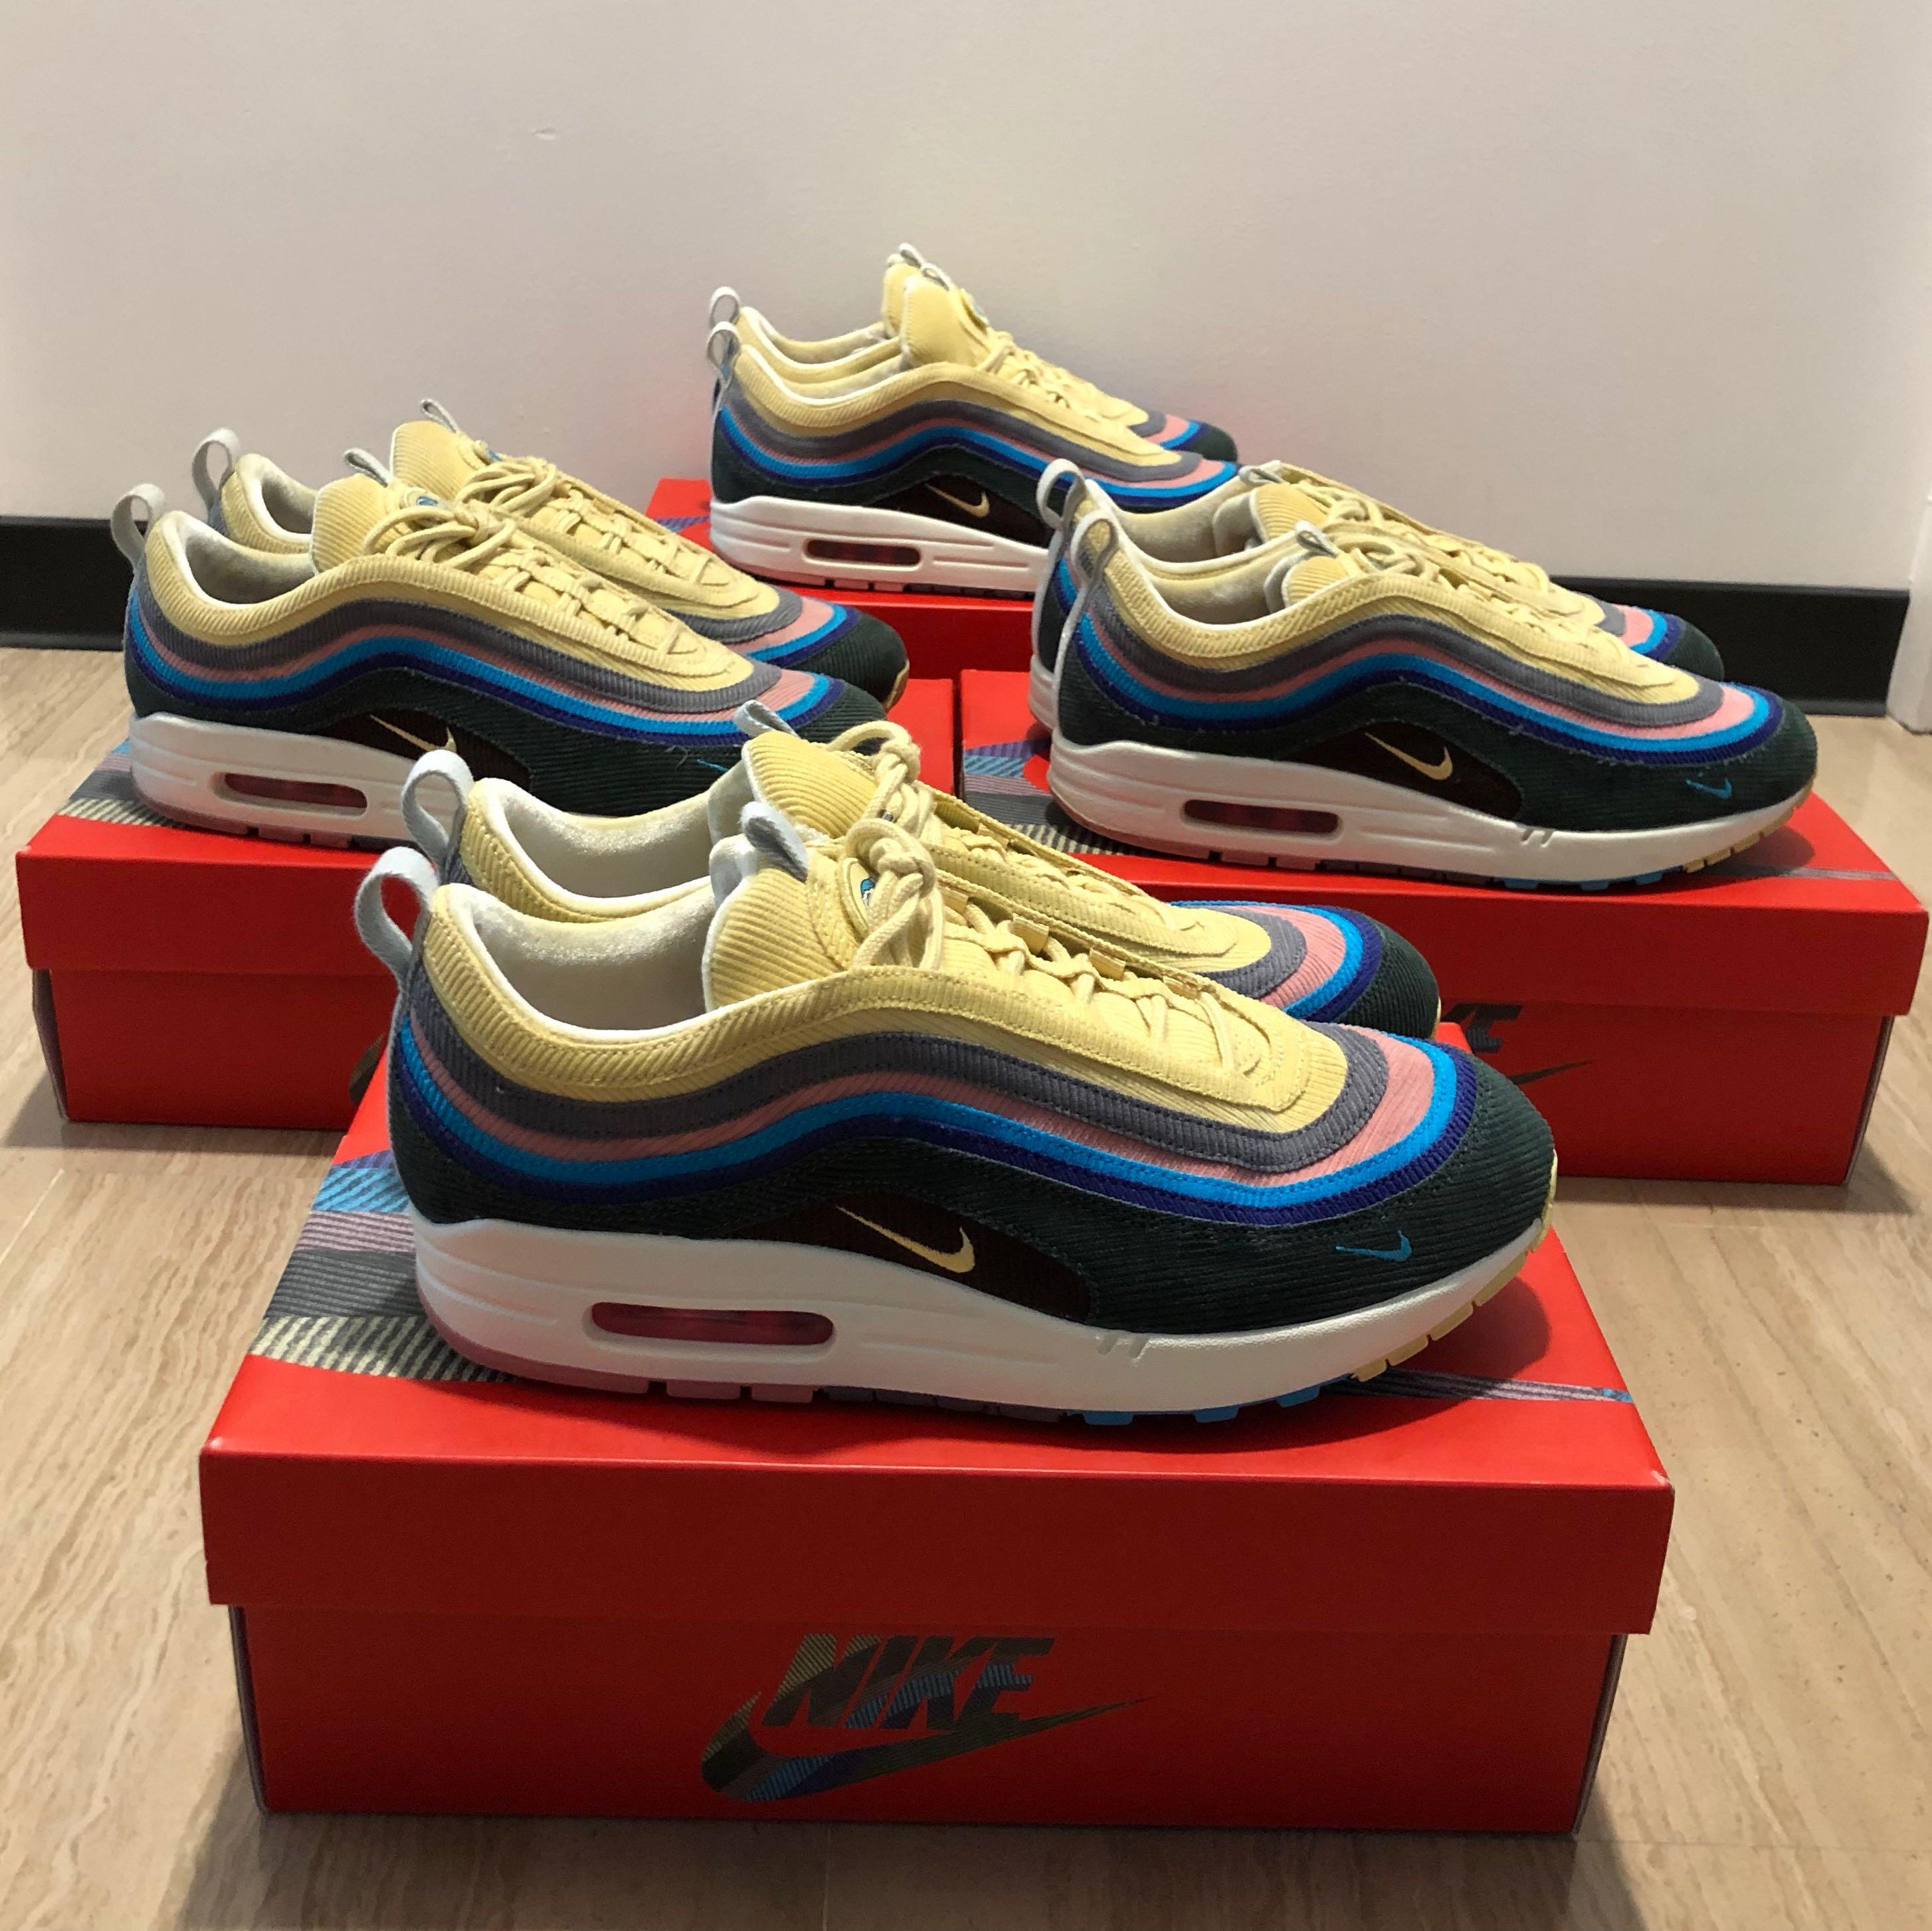 Nike Air Max 97/1 Sean Wotherspoon for 